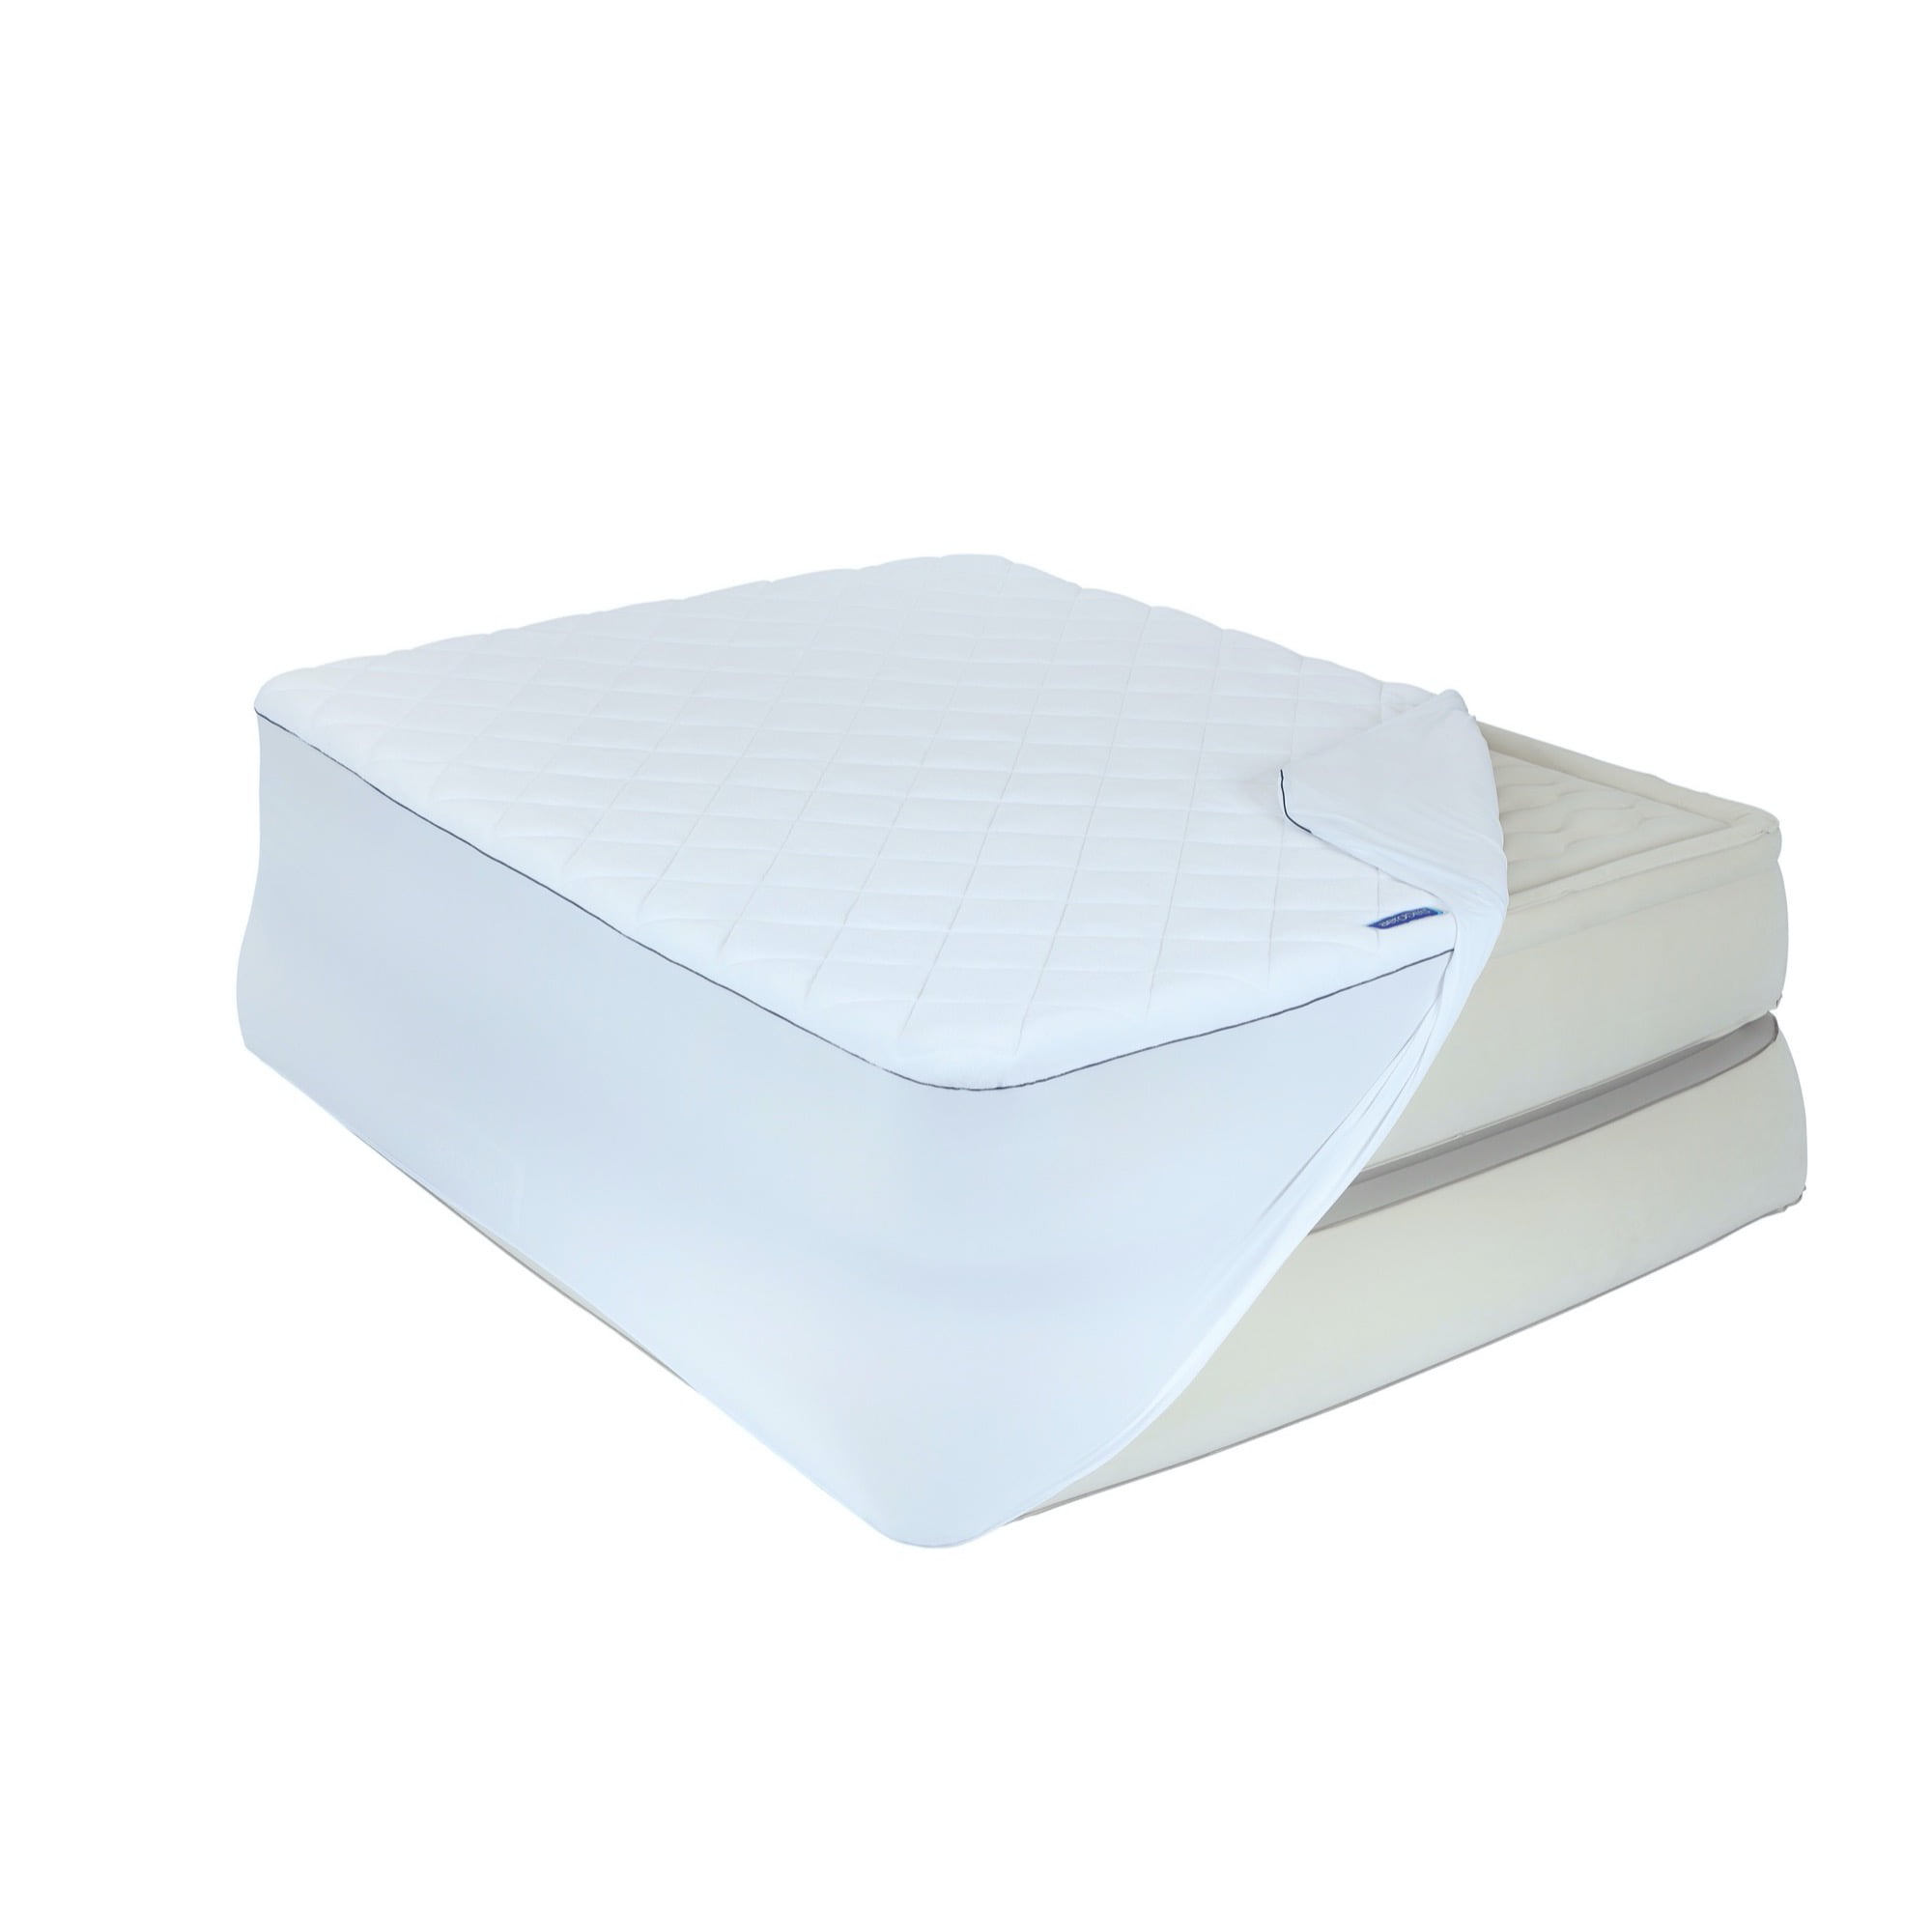 AeroBed Insulated Waterproof Mattress Pad for Air Beds - Twin, Full or Queen $9 + FS w/ W+